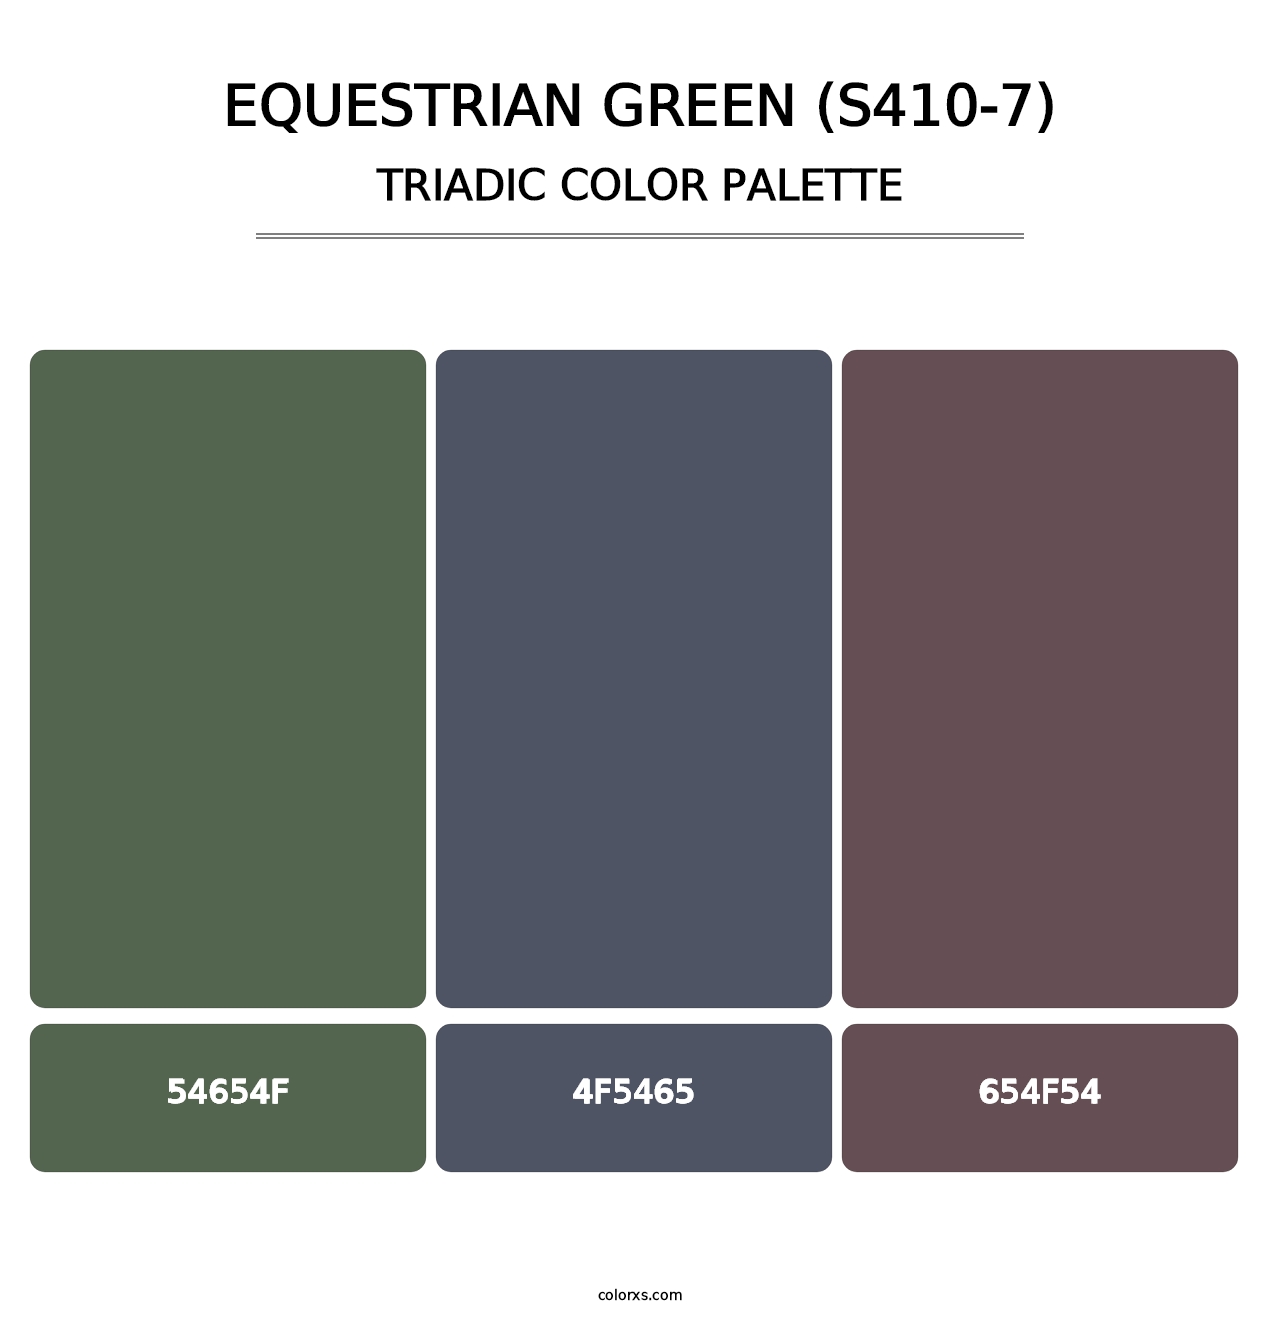 Equestrian Green (S410-7) - Triadic Color Palette